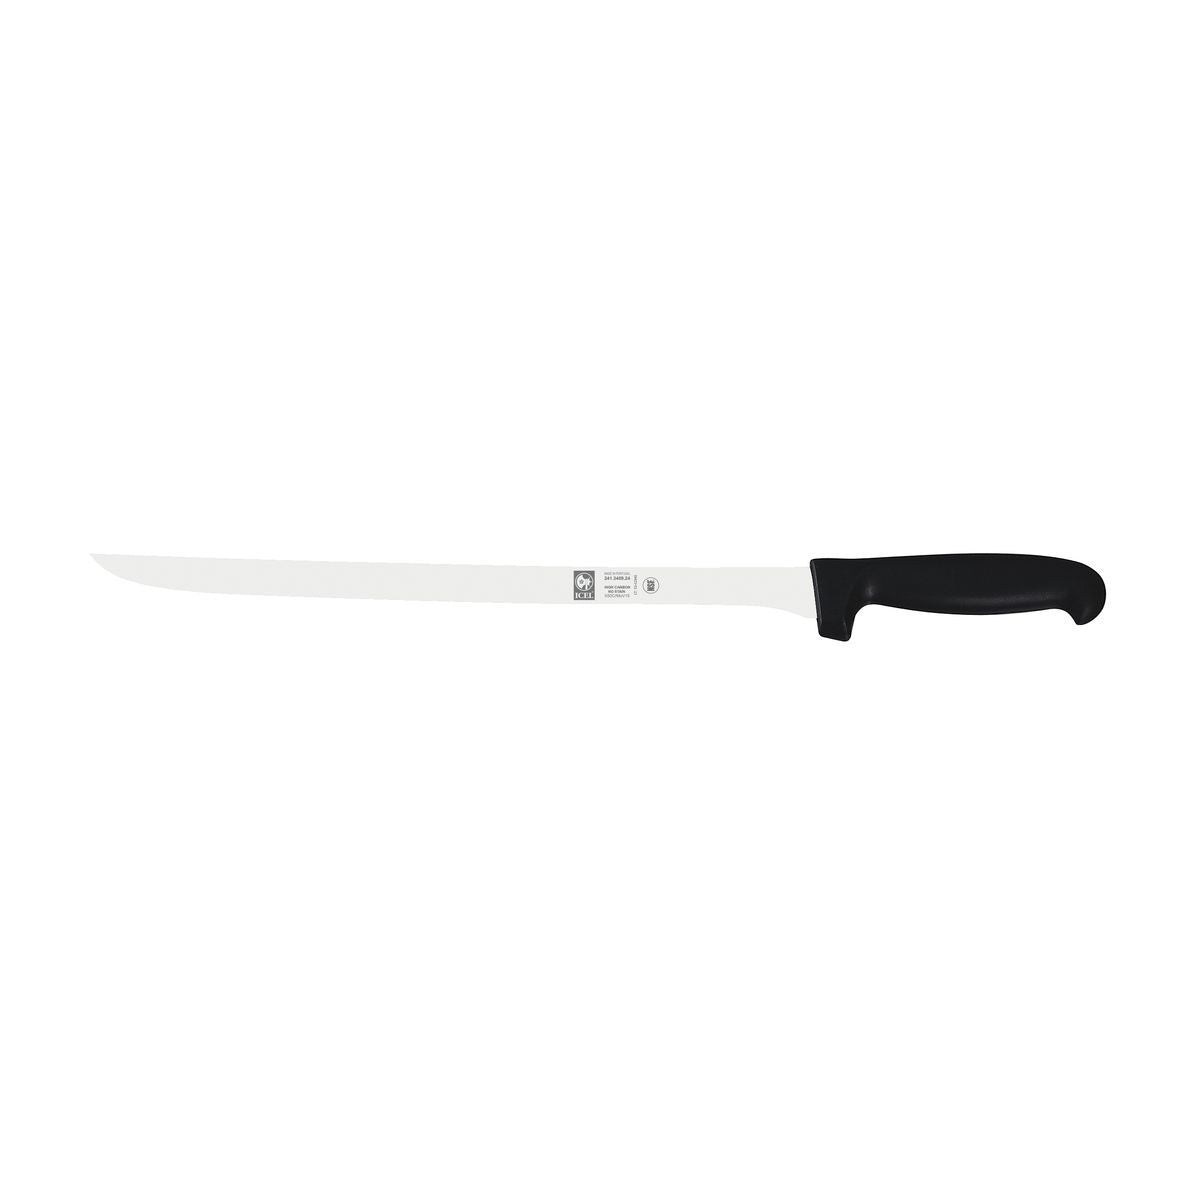 Ham Slicing Knife - 300Mm from Icel. Sold in boxes of 1. Hospitality quality at wholesale price with The Flying Fork! 